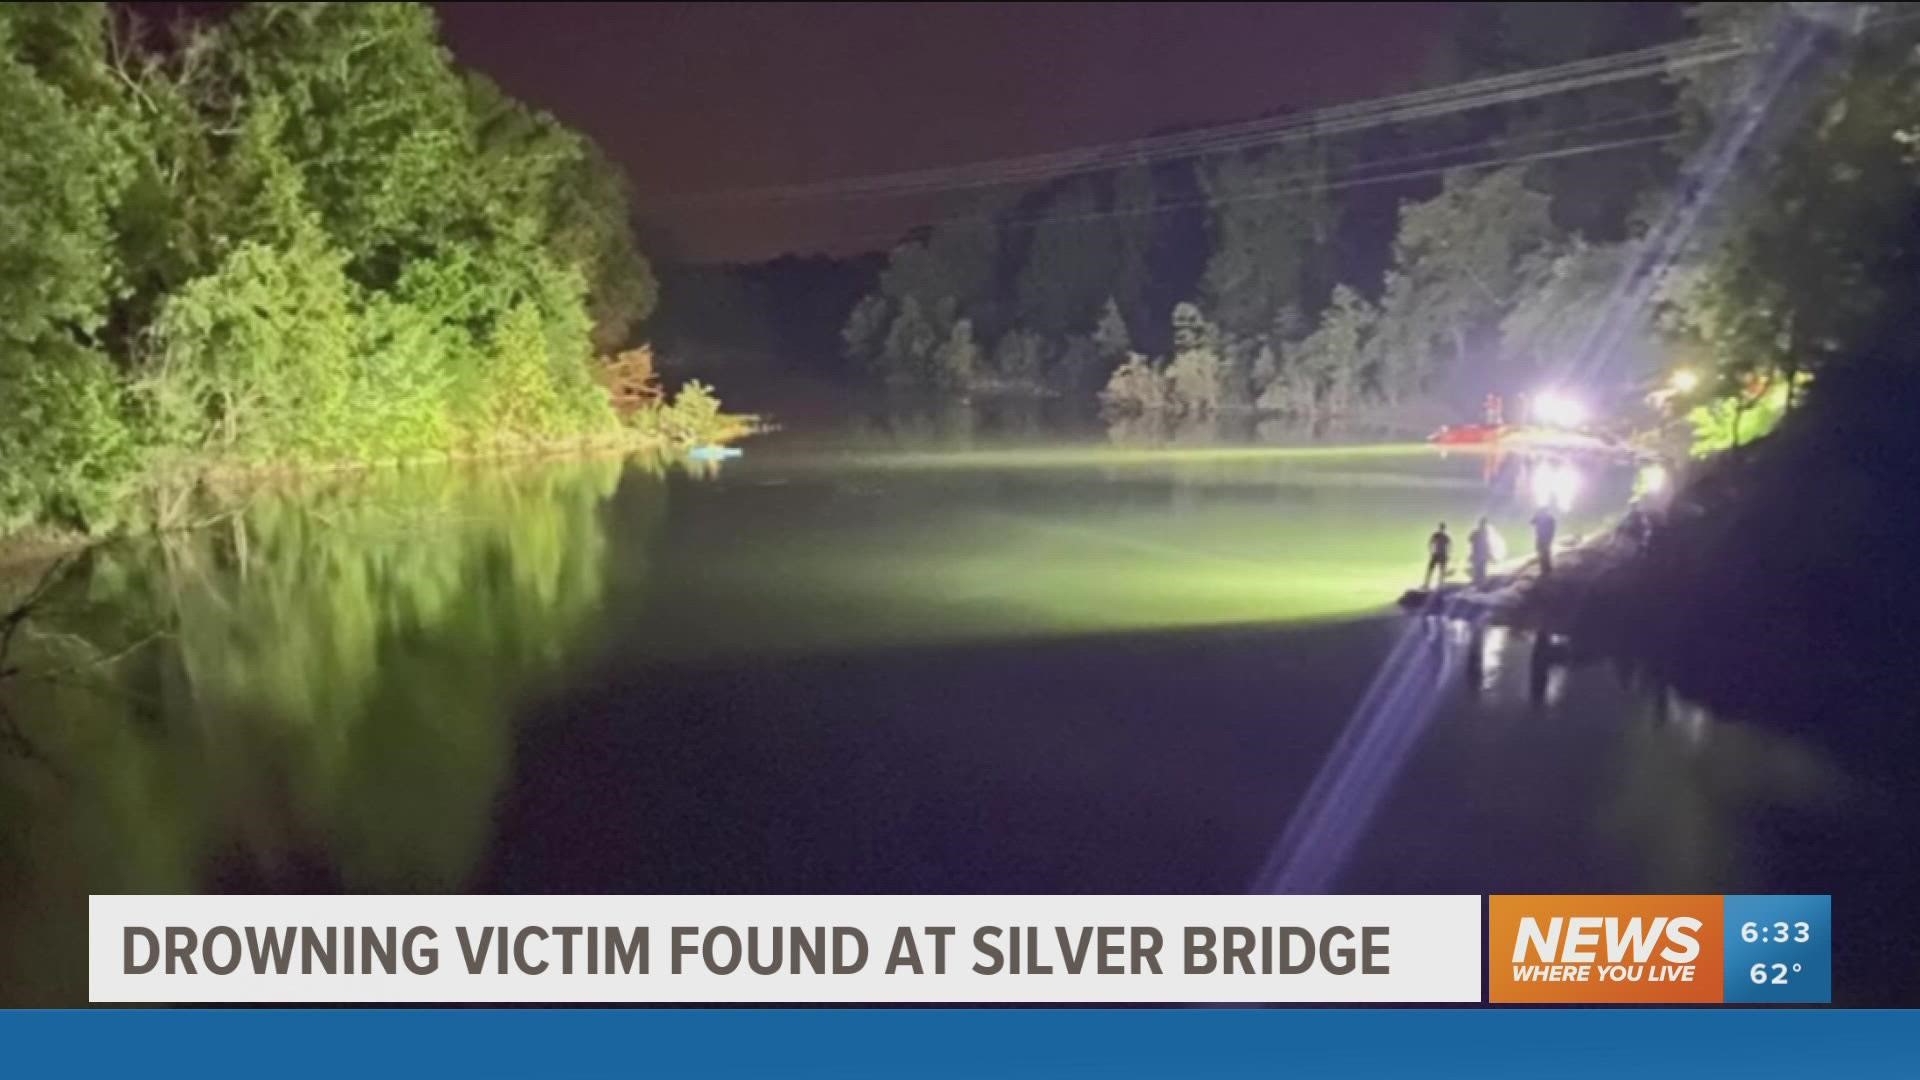 The bridge is currently closed from both sides as crews are in the water searching for the victim.